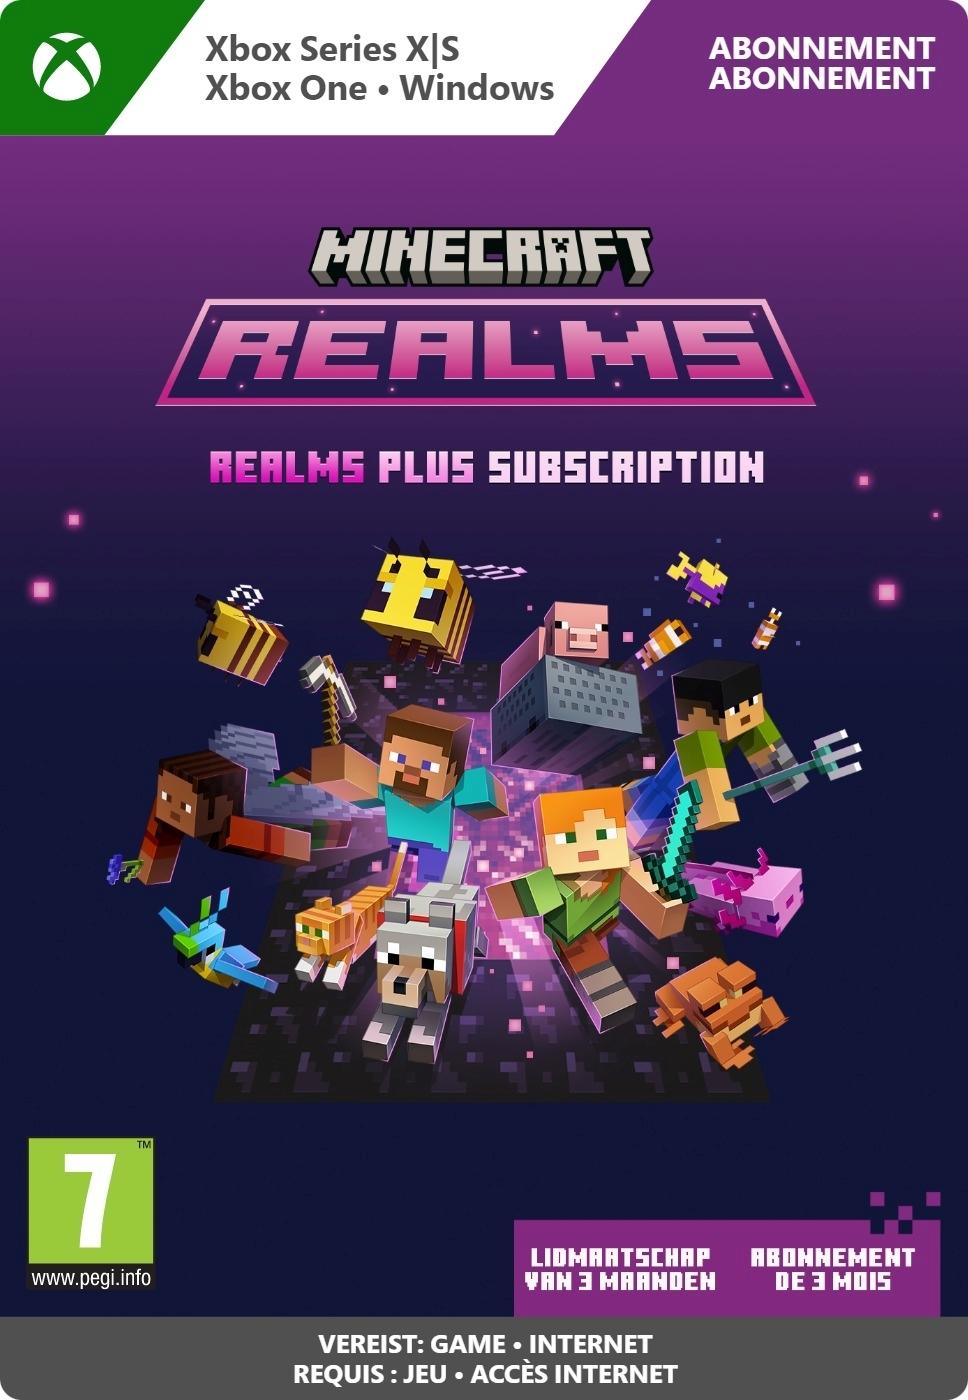 Minecraft Realms Plus 3-Month Subscription - Xbox Series X/Xbox One/Win10 - Subscription | 7LM-00049 (2ce67e39-1f26-0945-b953-b51ee05a2841)